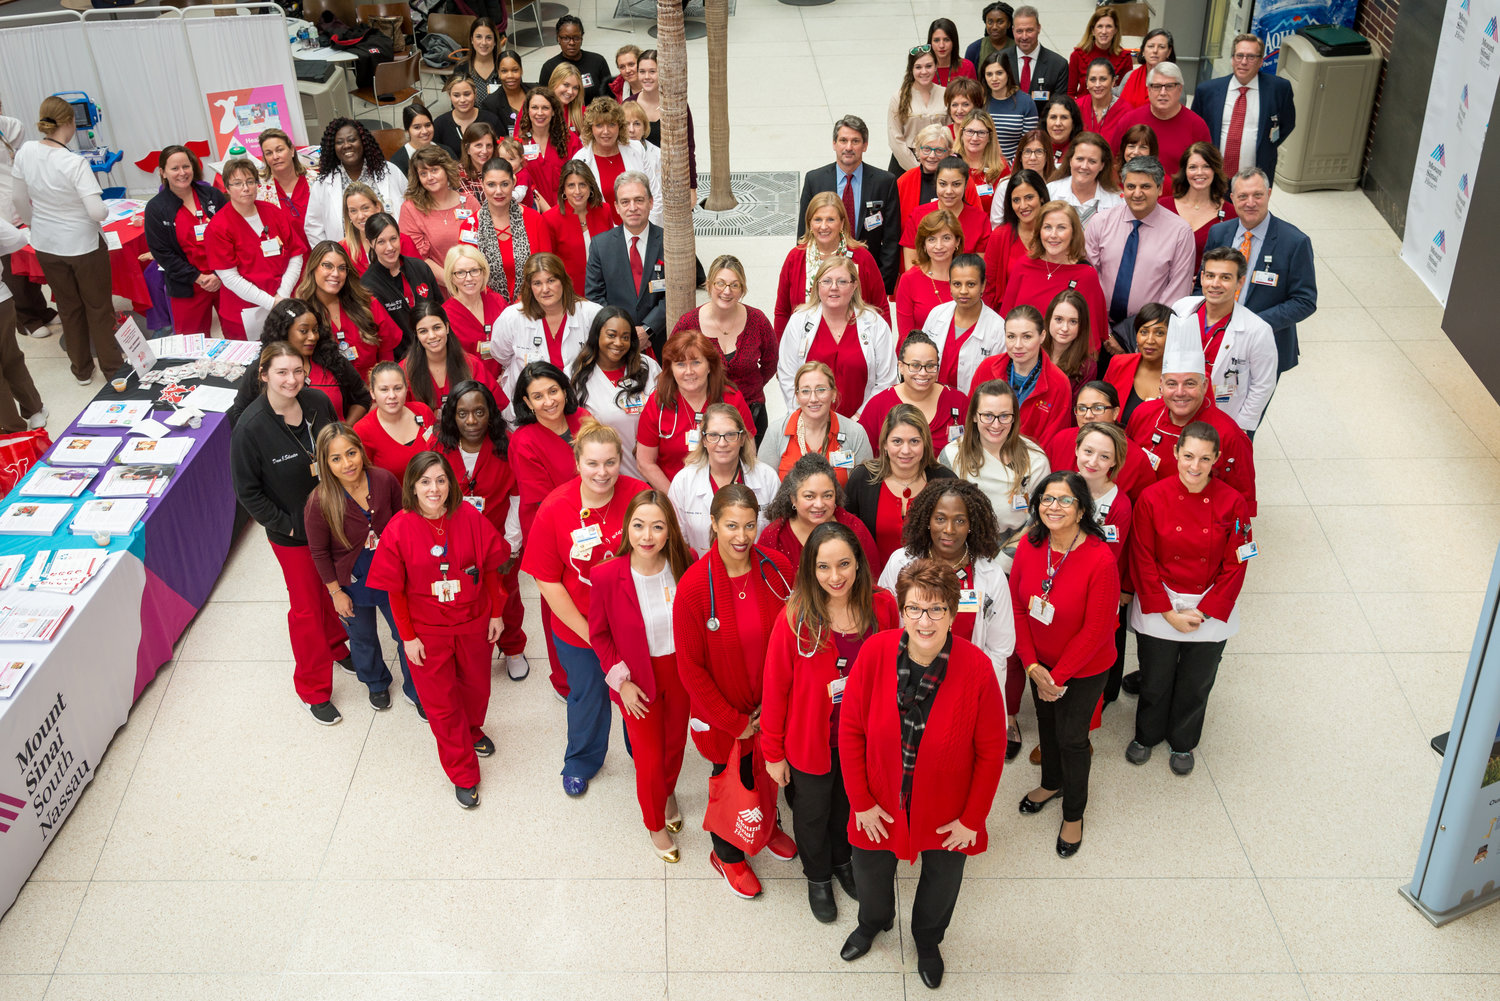 Mount Sinai South Nassau hosted its annual Go Red for Women Day celebration on Feb. 7, which promoted heart health.